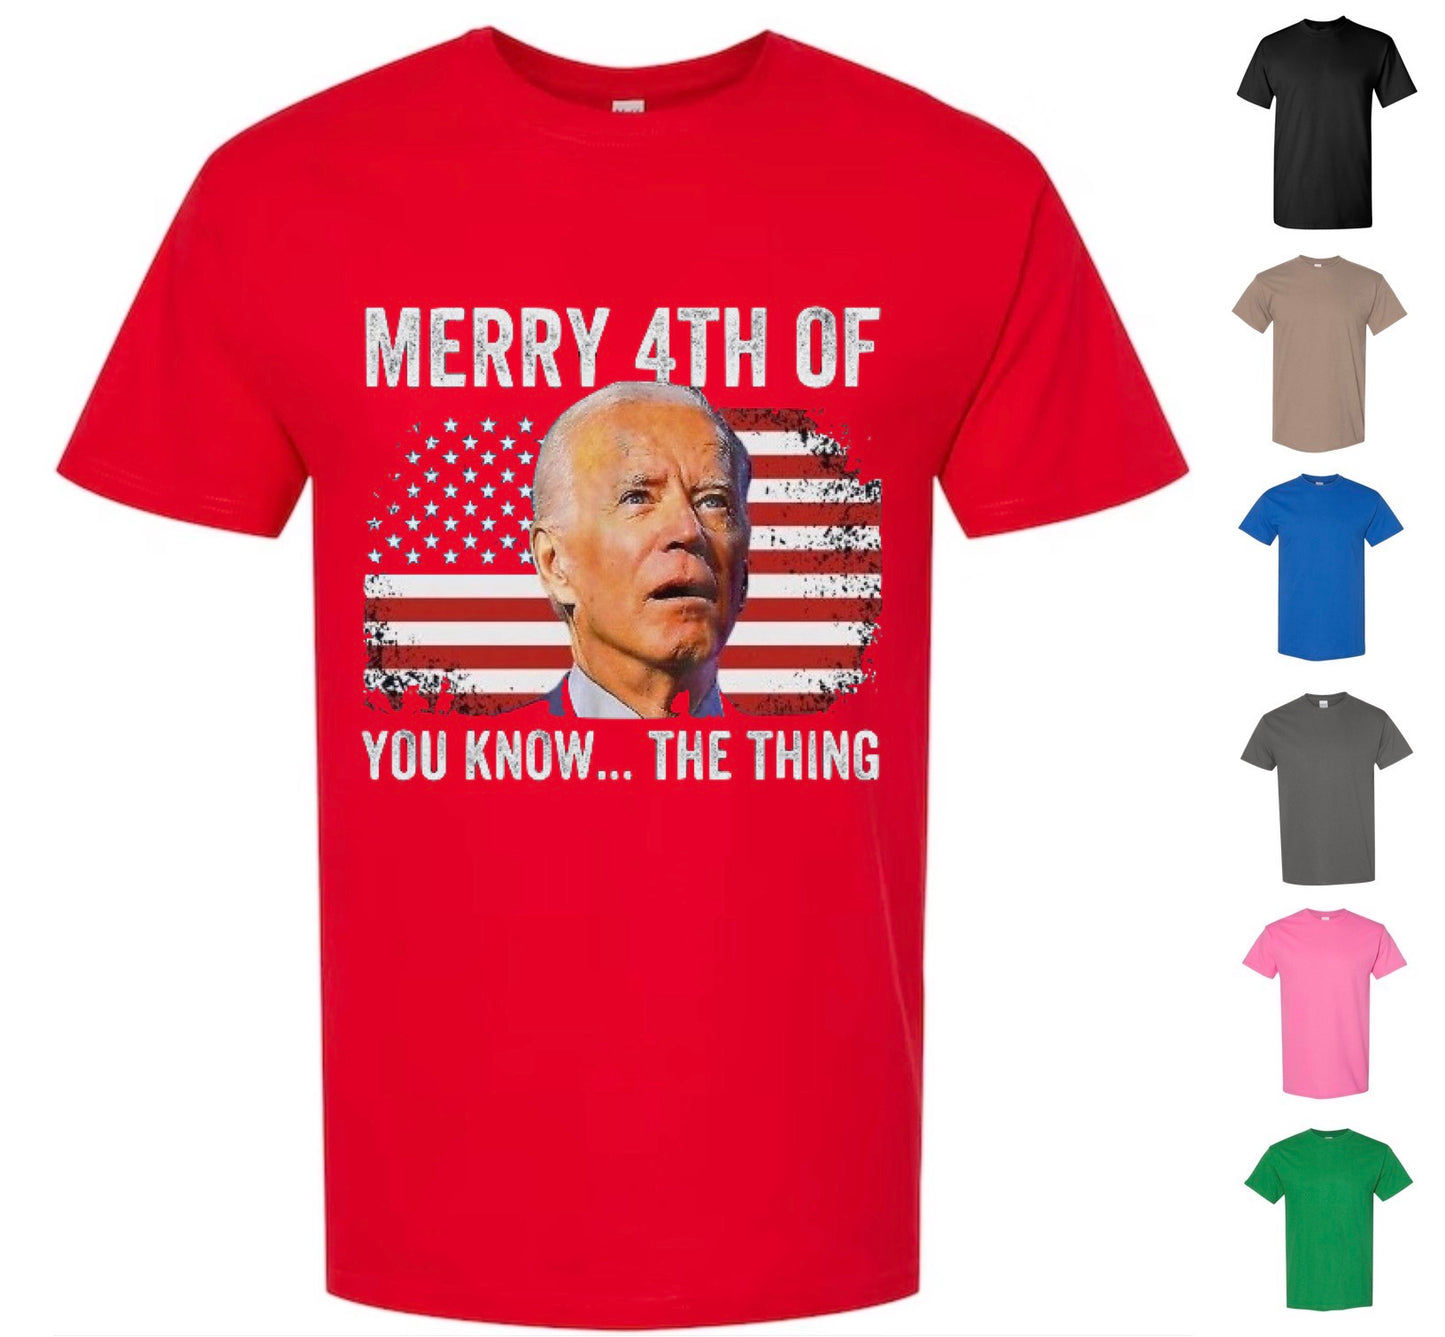 Merry 4th of You Know The Thing (Free Shipping)